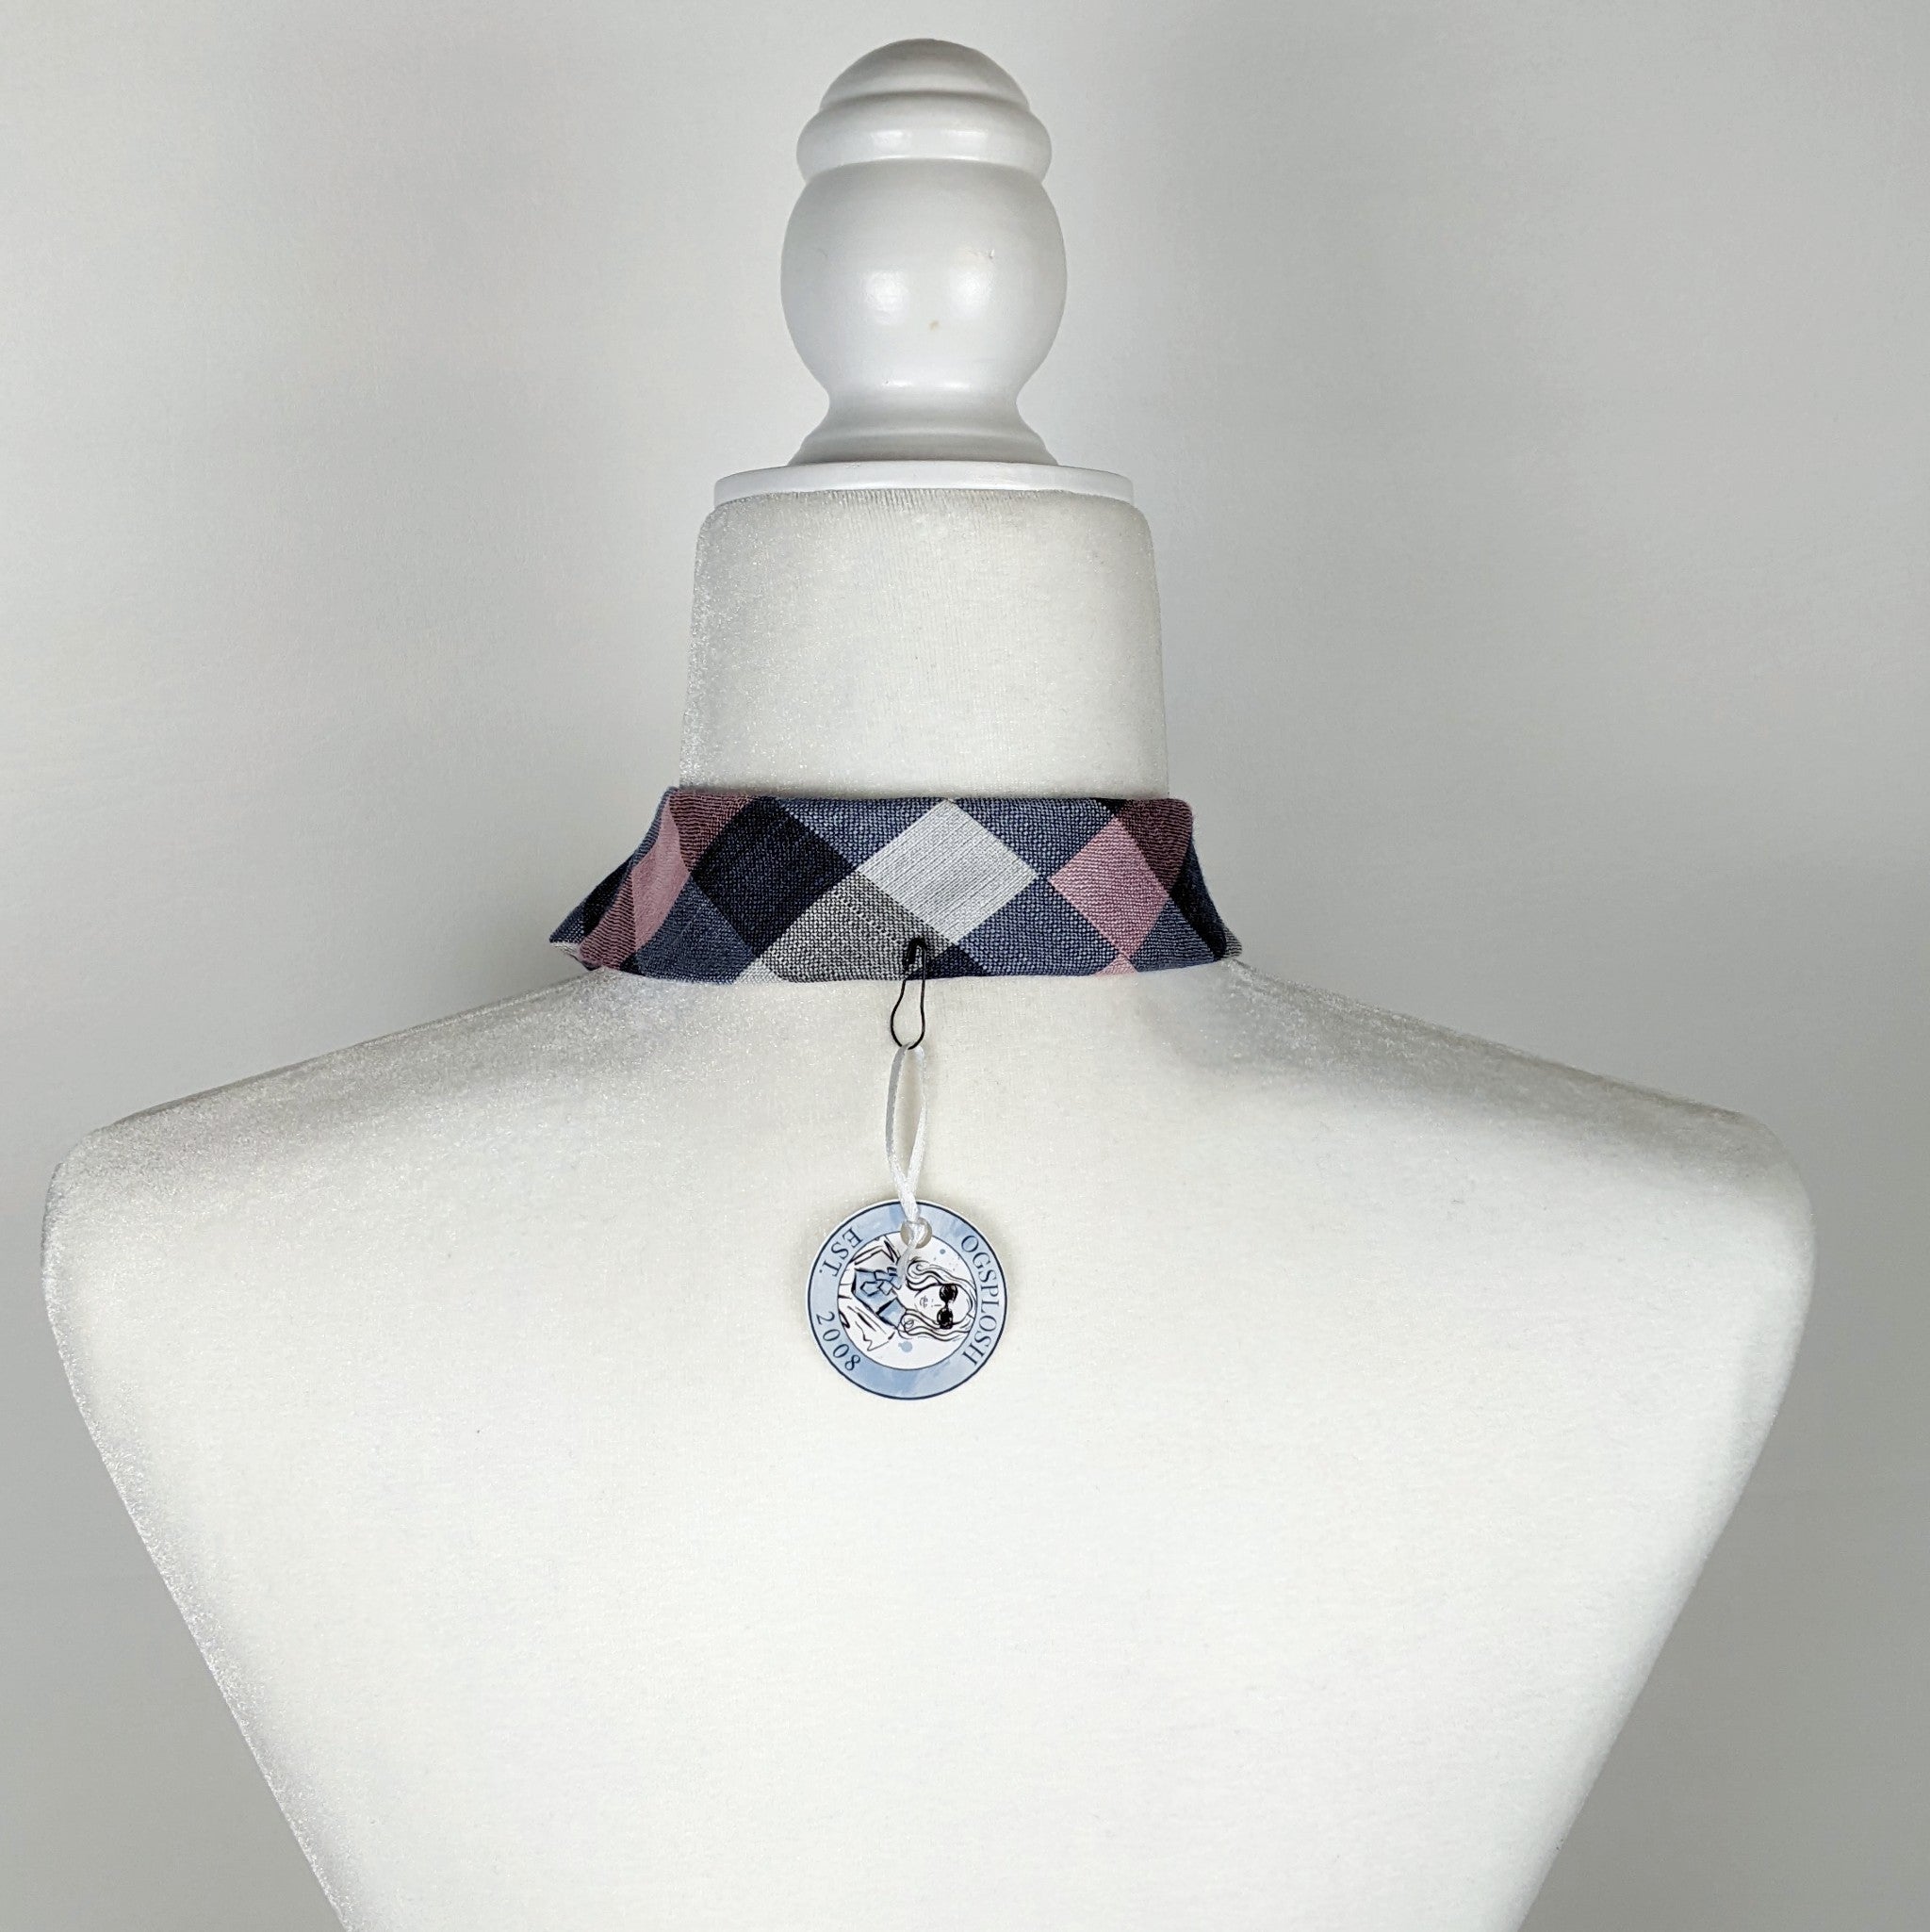 Women's Skinny Ascot Scarf In Pink And Grey Buffalo Plaid